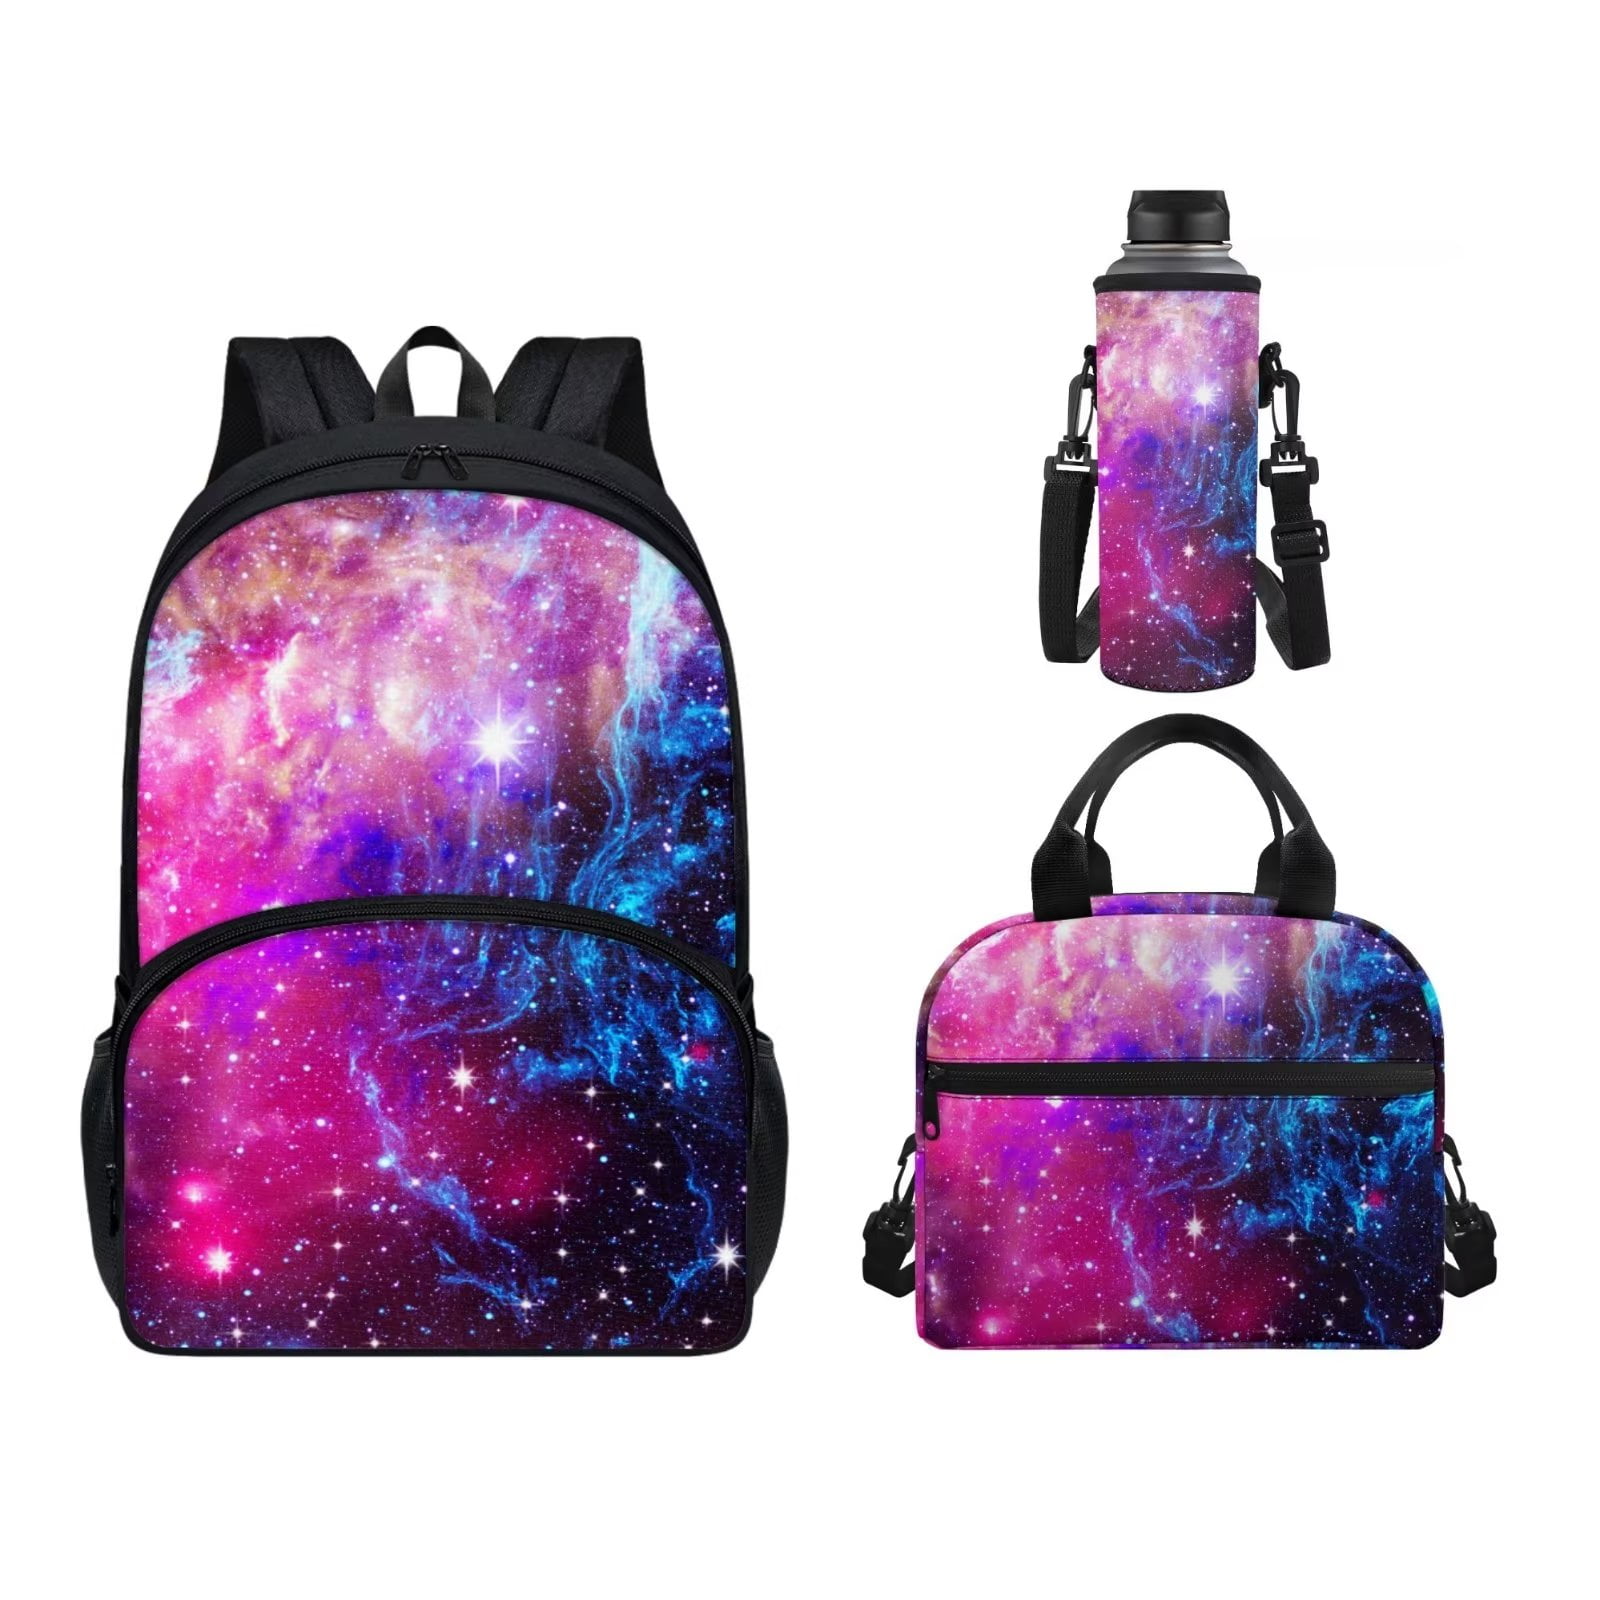  E-Clover Galaxy Backpack for Girls Kids Backpacks with Lunch  Box Set School Bag for Elementary Kindergarten Purple Space